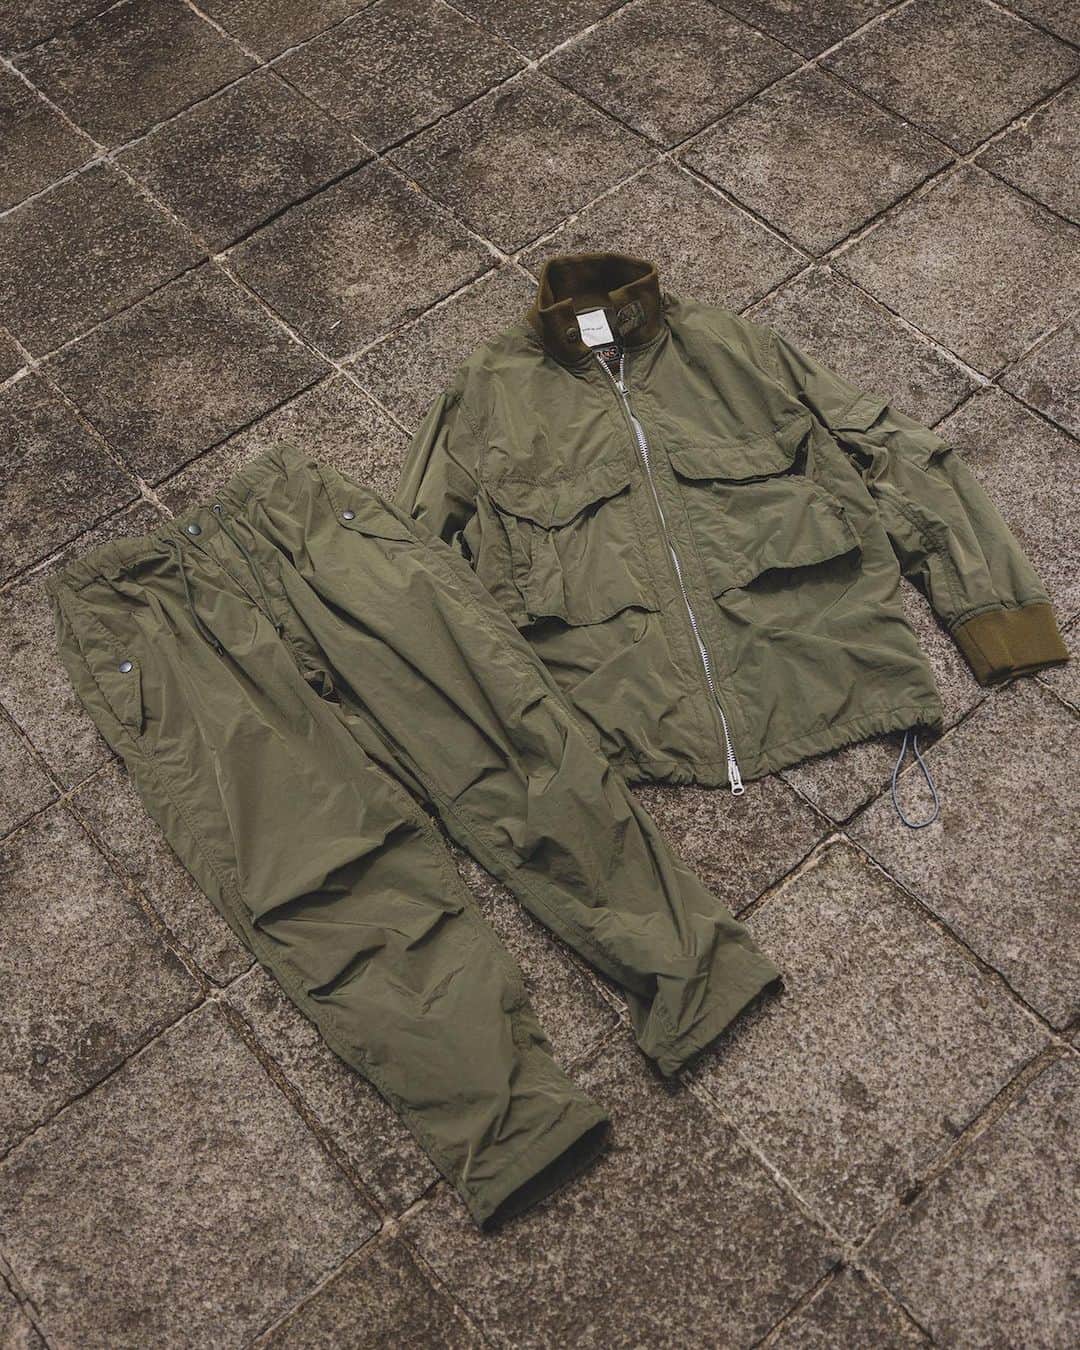 BEAMS+さんのインスタグラム写真 - (BEAMS+Instagram)「. SAGE DE CRET × BEAMS PLUS 10.6 (Fri.) Release  SAGE DE CRET" offers military and traditional wear, which is designer Hitoshi Senda's specialty. . The military set-up series is popular every season. This time, two models based on the "Flight Jacket" and "Over Pants" were produced. The flight jacket features front pocket details and action pleats at the back, while the over pants have a beautiful tapered silhouette. The two-layer tailoring using different fabrics for the outer and inner lining gives the garments an airy look and puckering of the sewing stitches created by the difference in shrinkage rates. . While retaining the original masculinity of military wear, the expression of the fabric and the refined silhouette make for an elegant set-up.  ------------------------------ . デザイナーの千田仁寿氏が得意とするミリタリーやトラディショナルウェアを展開する〈SAGE DE CRET〉。 . 毎シーズン好評のミリタリーセットアップシリーズ。今回は『Flight Jacket』『Over Pants』をベースに2型を製作。 フロントのポケットディテールやバックのアクションプリーツが特徴的なフライトジャケットに、綺麗なテーパードシルエットのオーバーパンツ。 表地と裏地には異なる生地を使った二層仕立てにより、縮率の差で生まれる縫製ステッチのパッカリングとエアリーな表情が魅力です。 . ミリタリー ウェア本来の男らしさを残しつつ、生地の表情や洗練されたシルエットにより上品なセットアップに仕上がりました。 . @sagedecretofficial @sagedecret_official_jp @beams_official @beams_plus_harajuku @beams_plus_yurakucho #sagedecret #beams #beamsplus」10月2日 20時02分 - beams_plus_harajuku